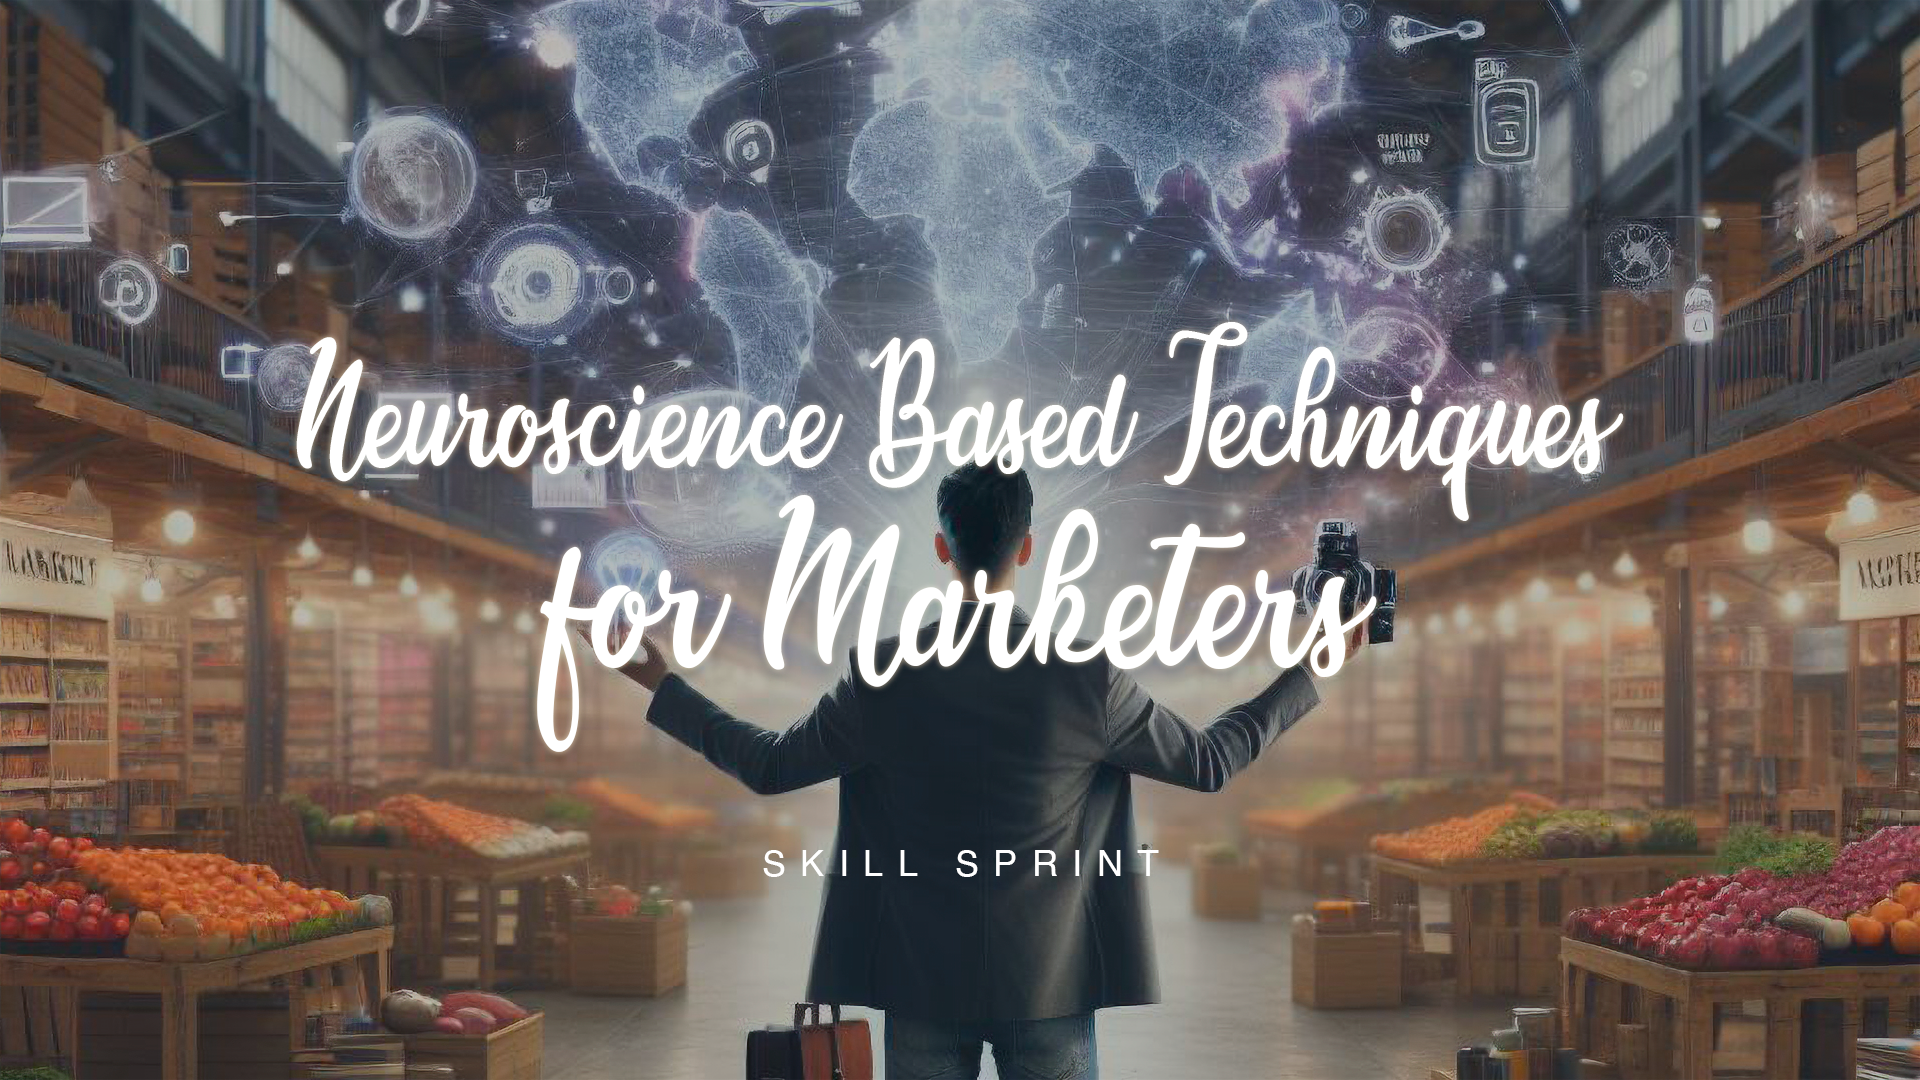 Neuroscience Based Techniques for Marketers